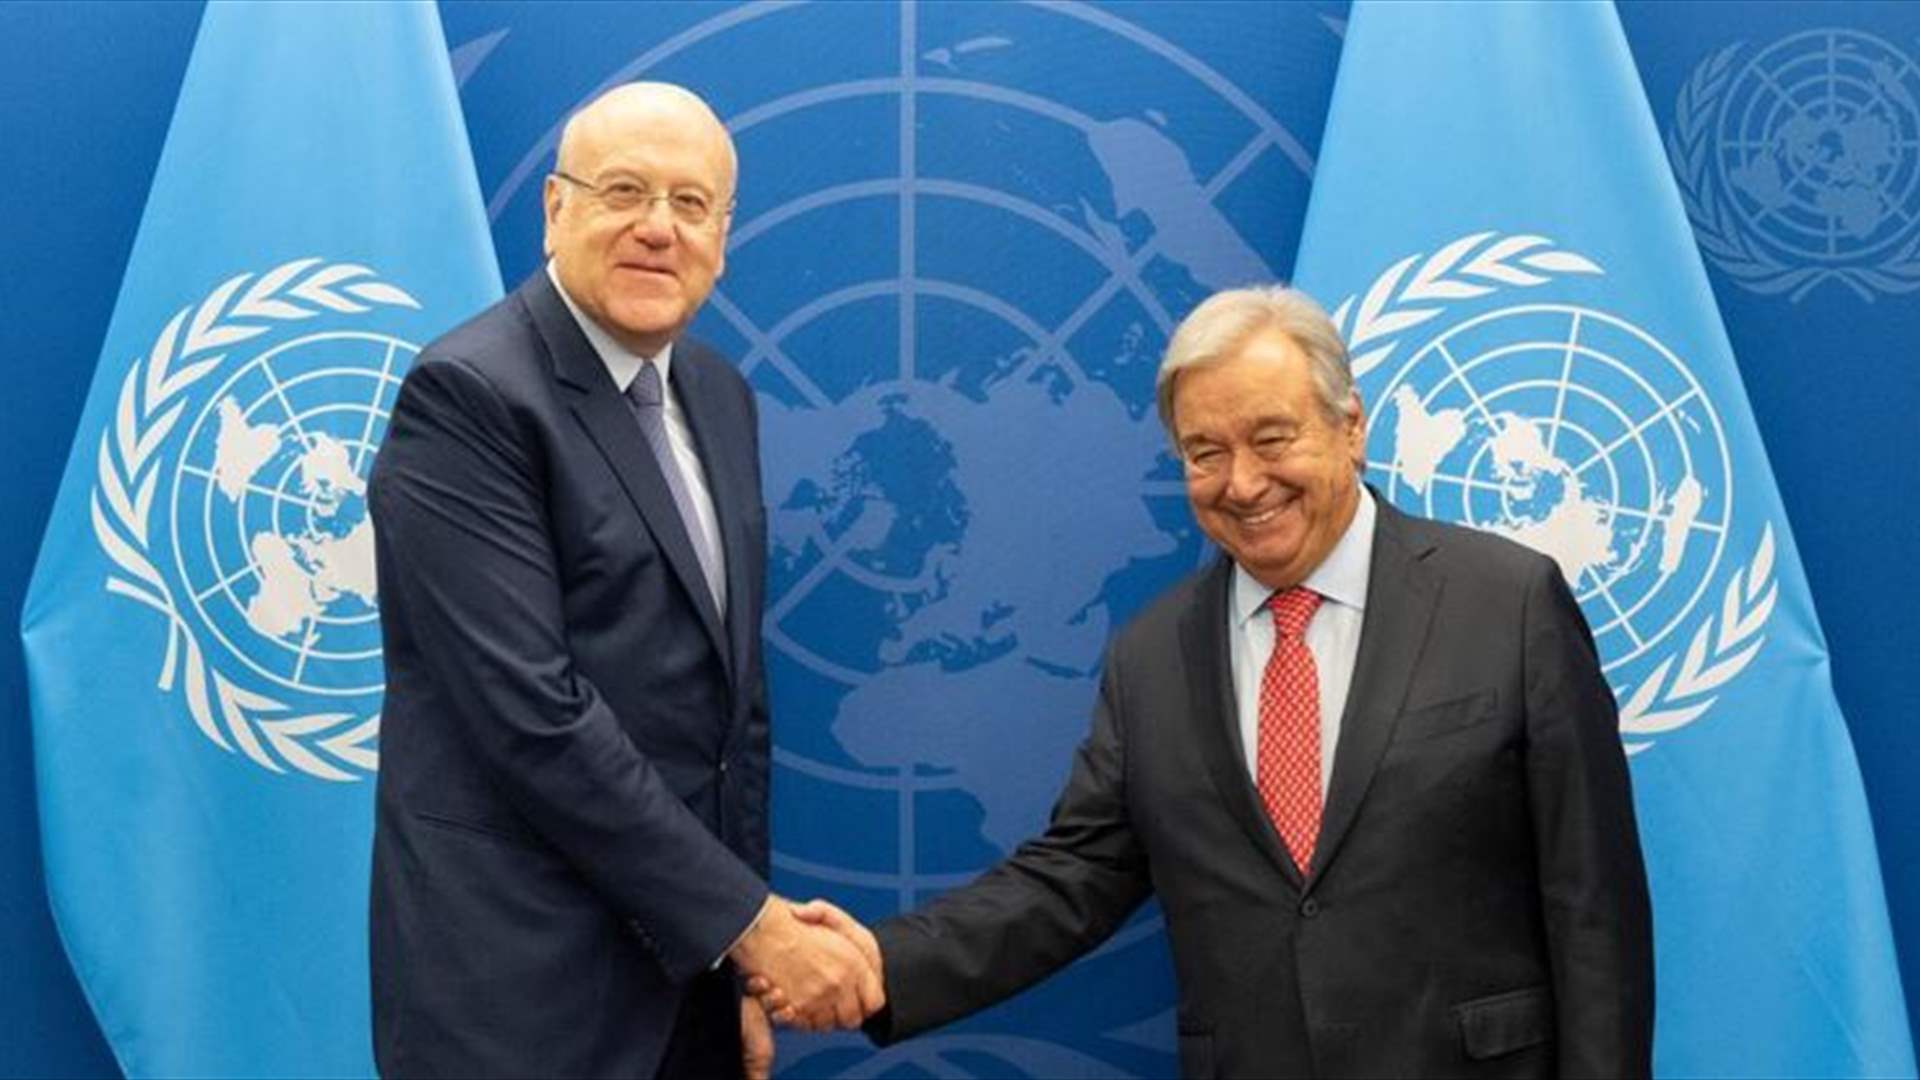 UN Secretary-General and Lebanese Prime Minister Discuss Ongoing Support and Refugee Crisis